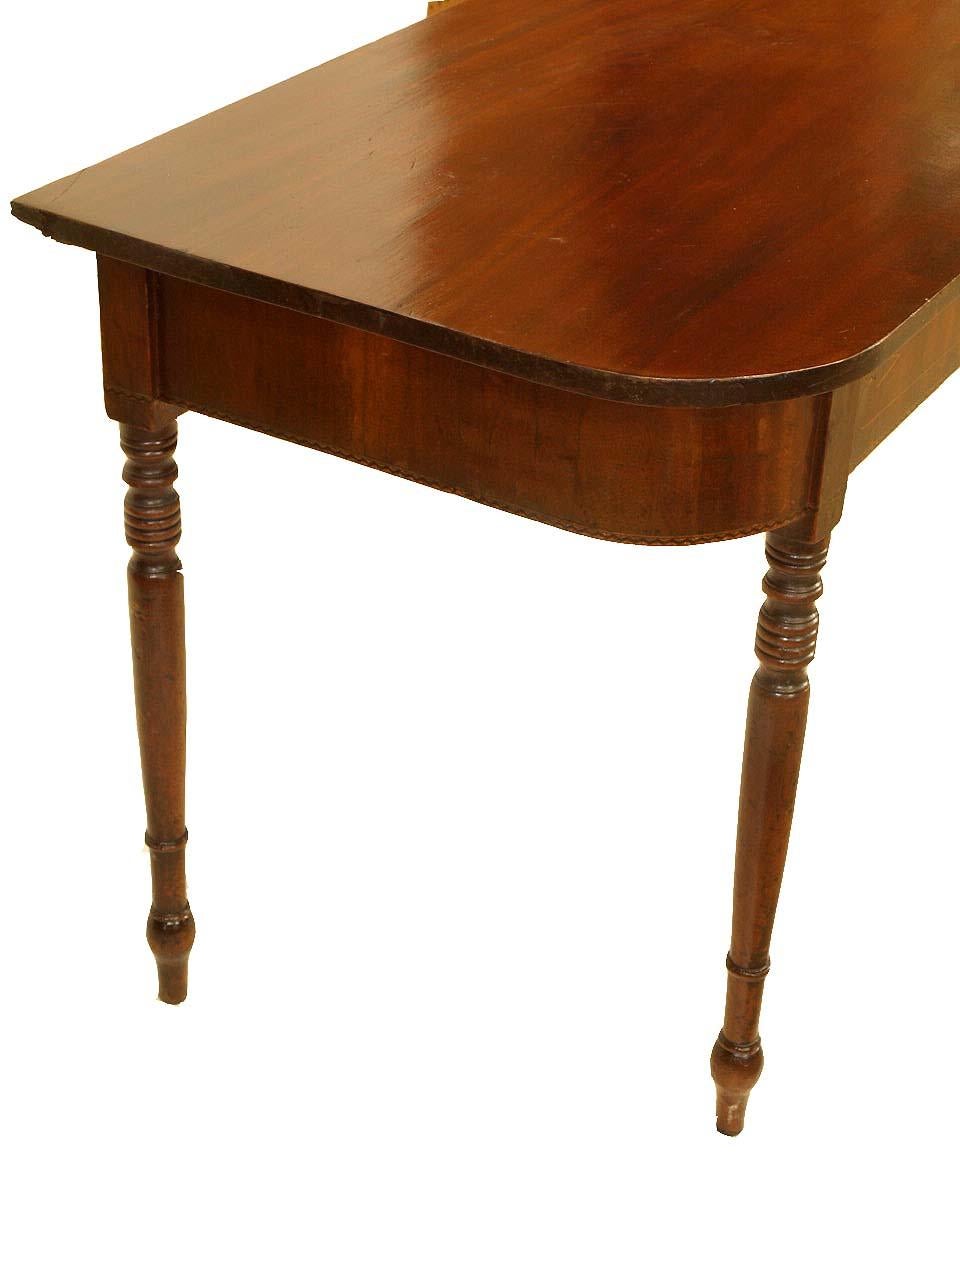 Sheraton mahogany console table, the front apron is veneered with flame mahogany and is inlaid with boxwood and has a band of decorative inlay along the bottom edge, the turned legs are very well proportioned, beautiful color and patina throughout .